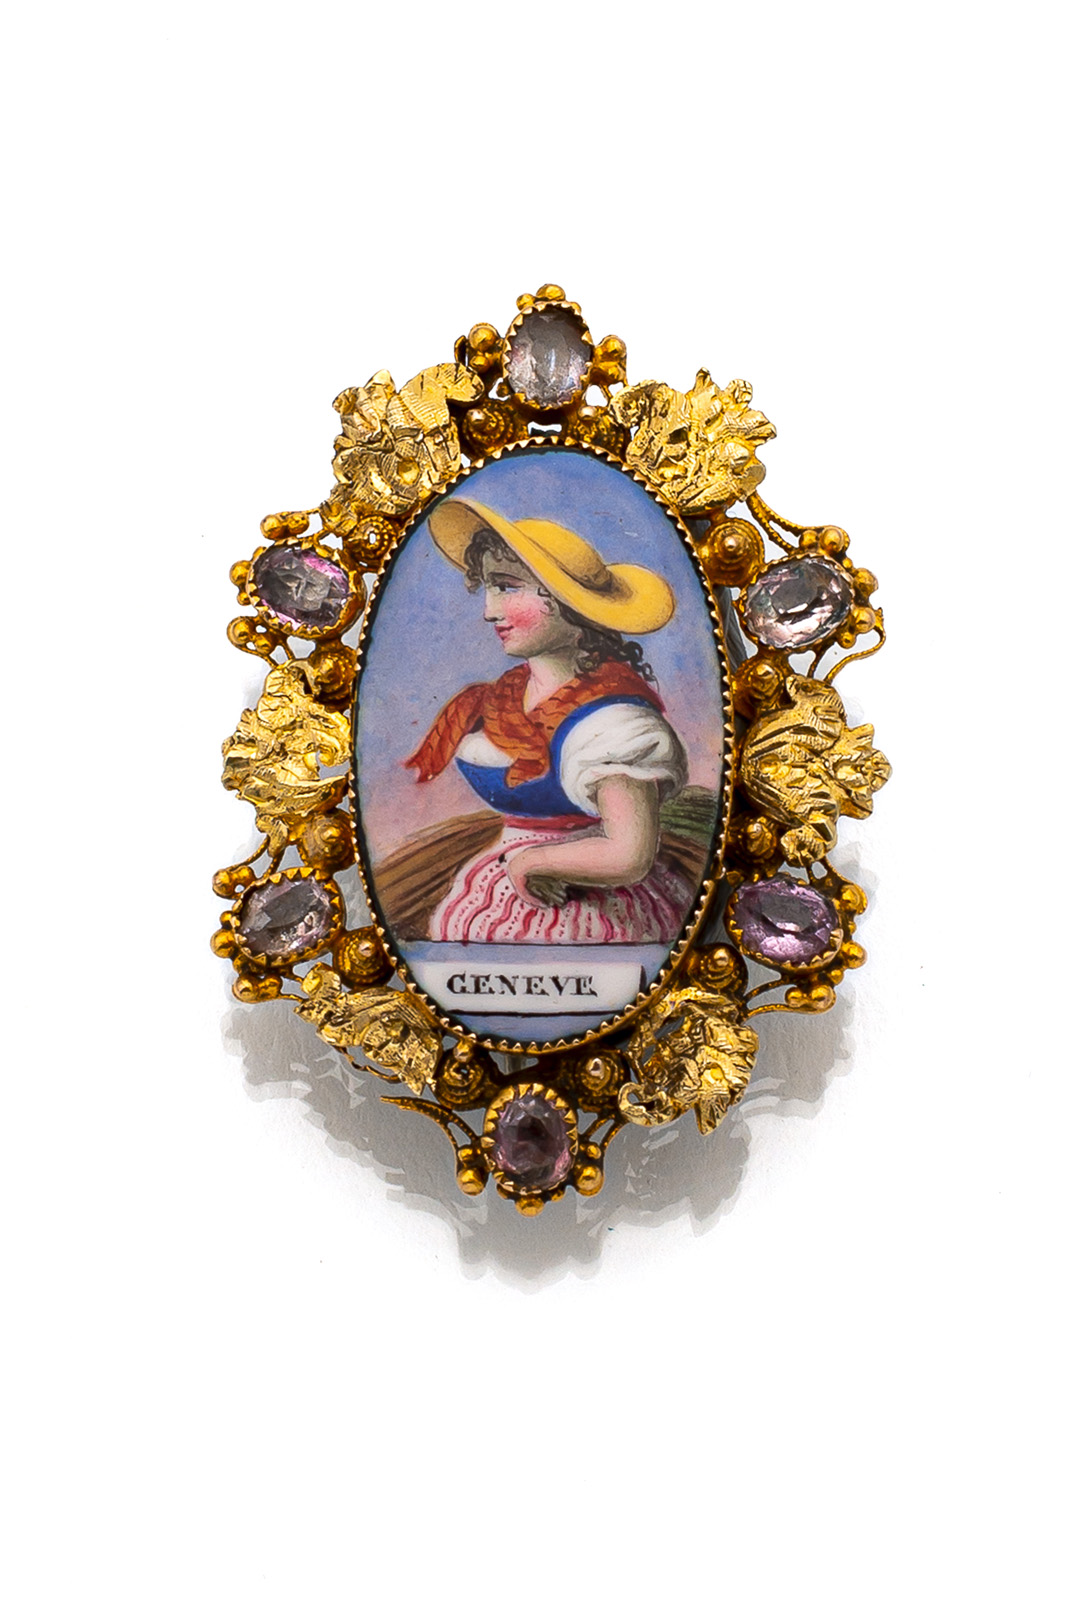 A SWISS ENAMELLED BROOCH WITH A GIRL FROM GENEVA